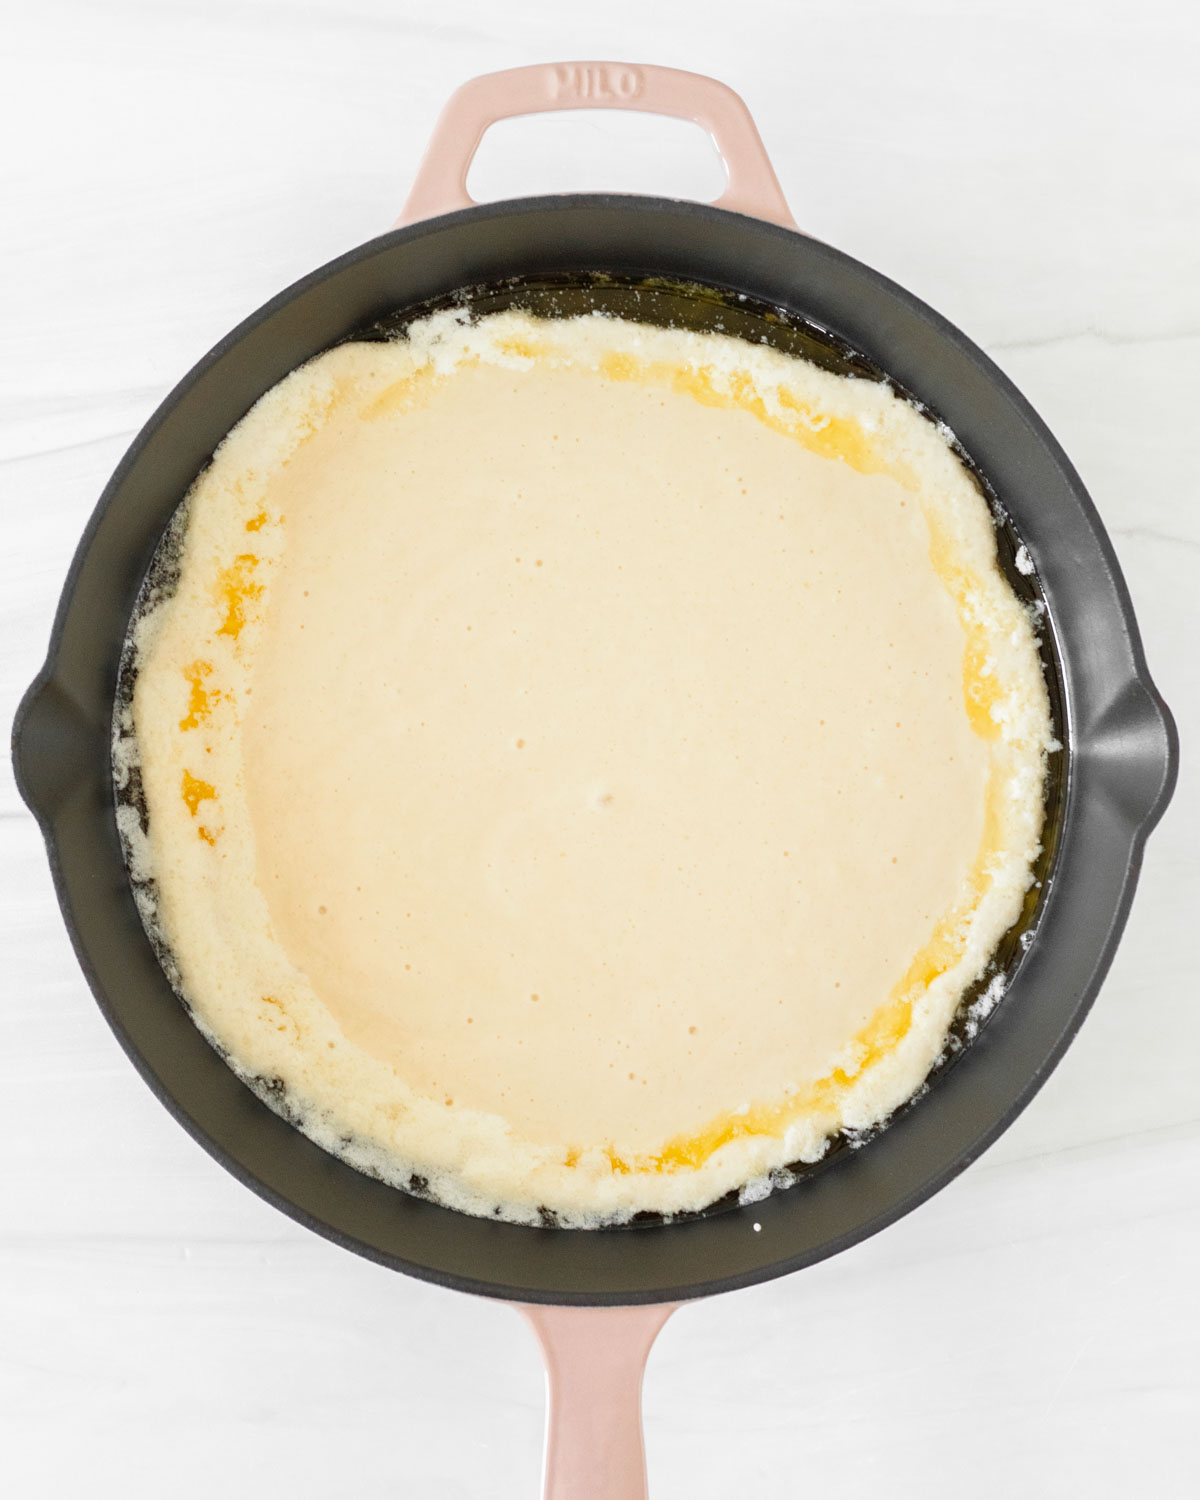 Step 8. Pour the batter into the skillet with the butter